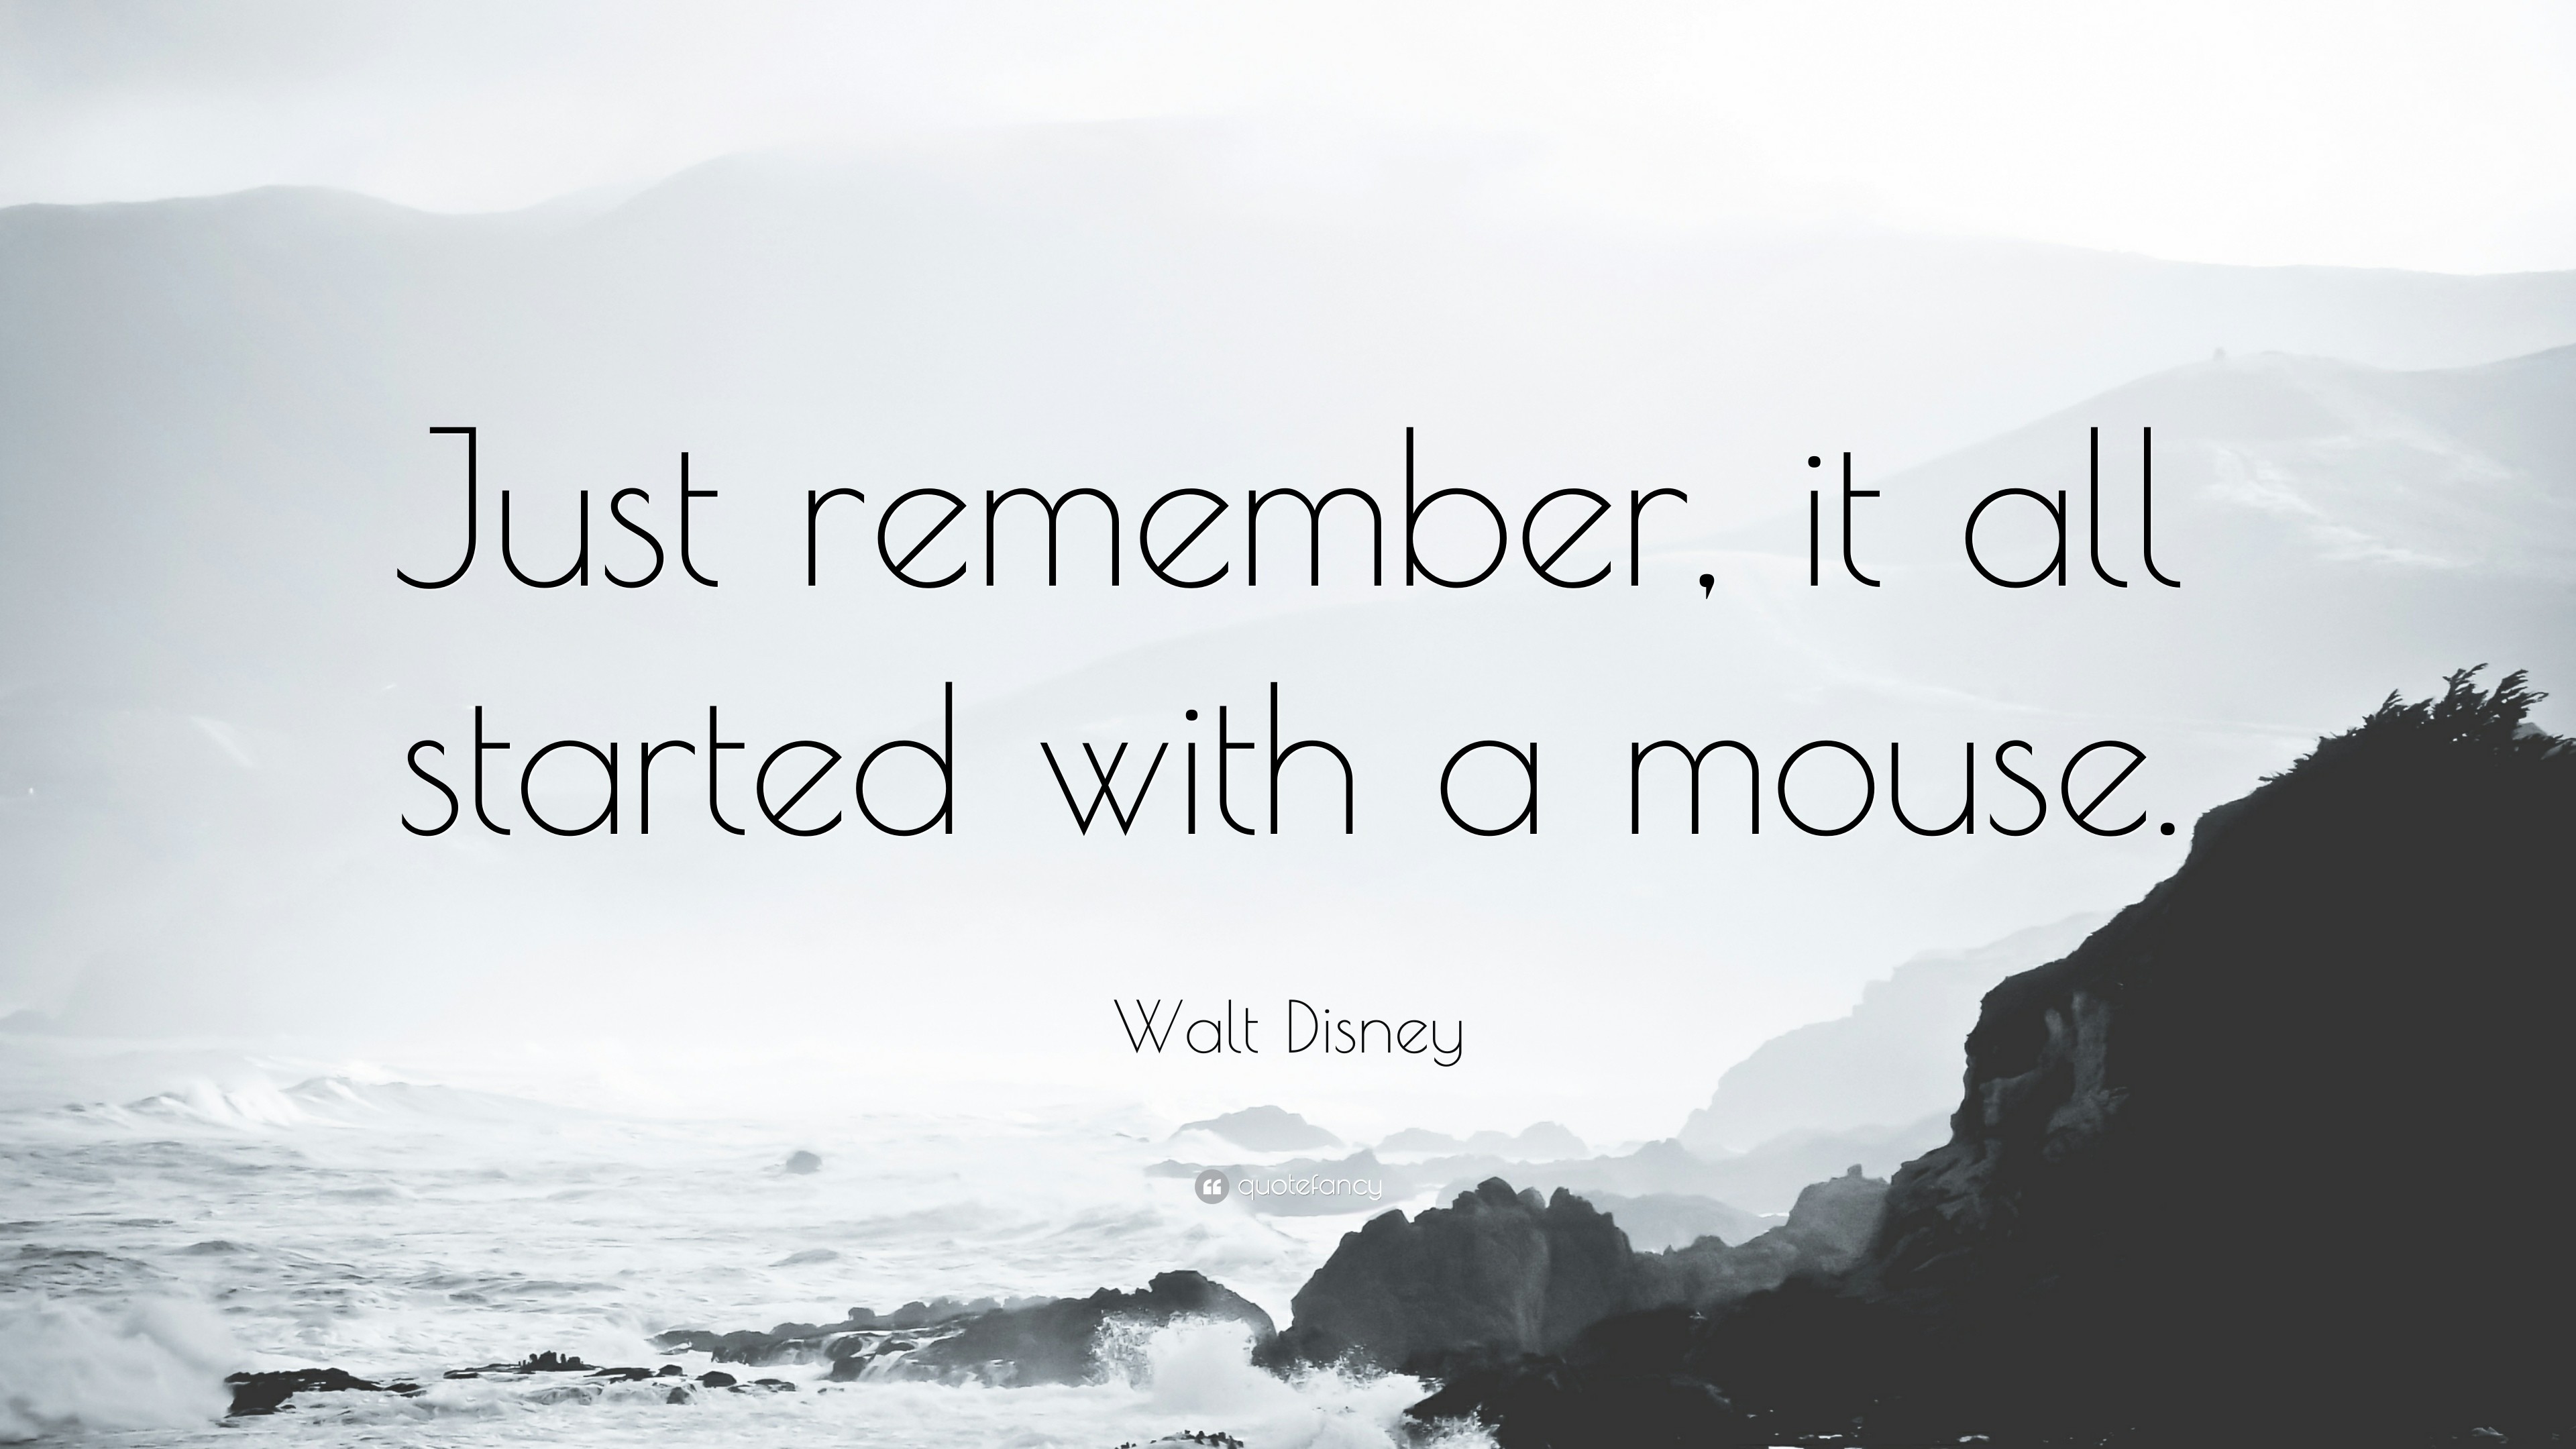 3840x2160 Walt Disney Quote: “Just remember, it all started with a mouse.”